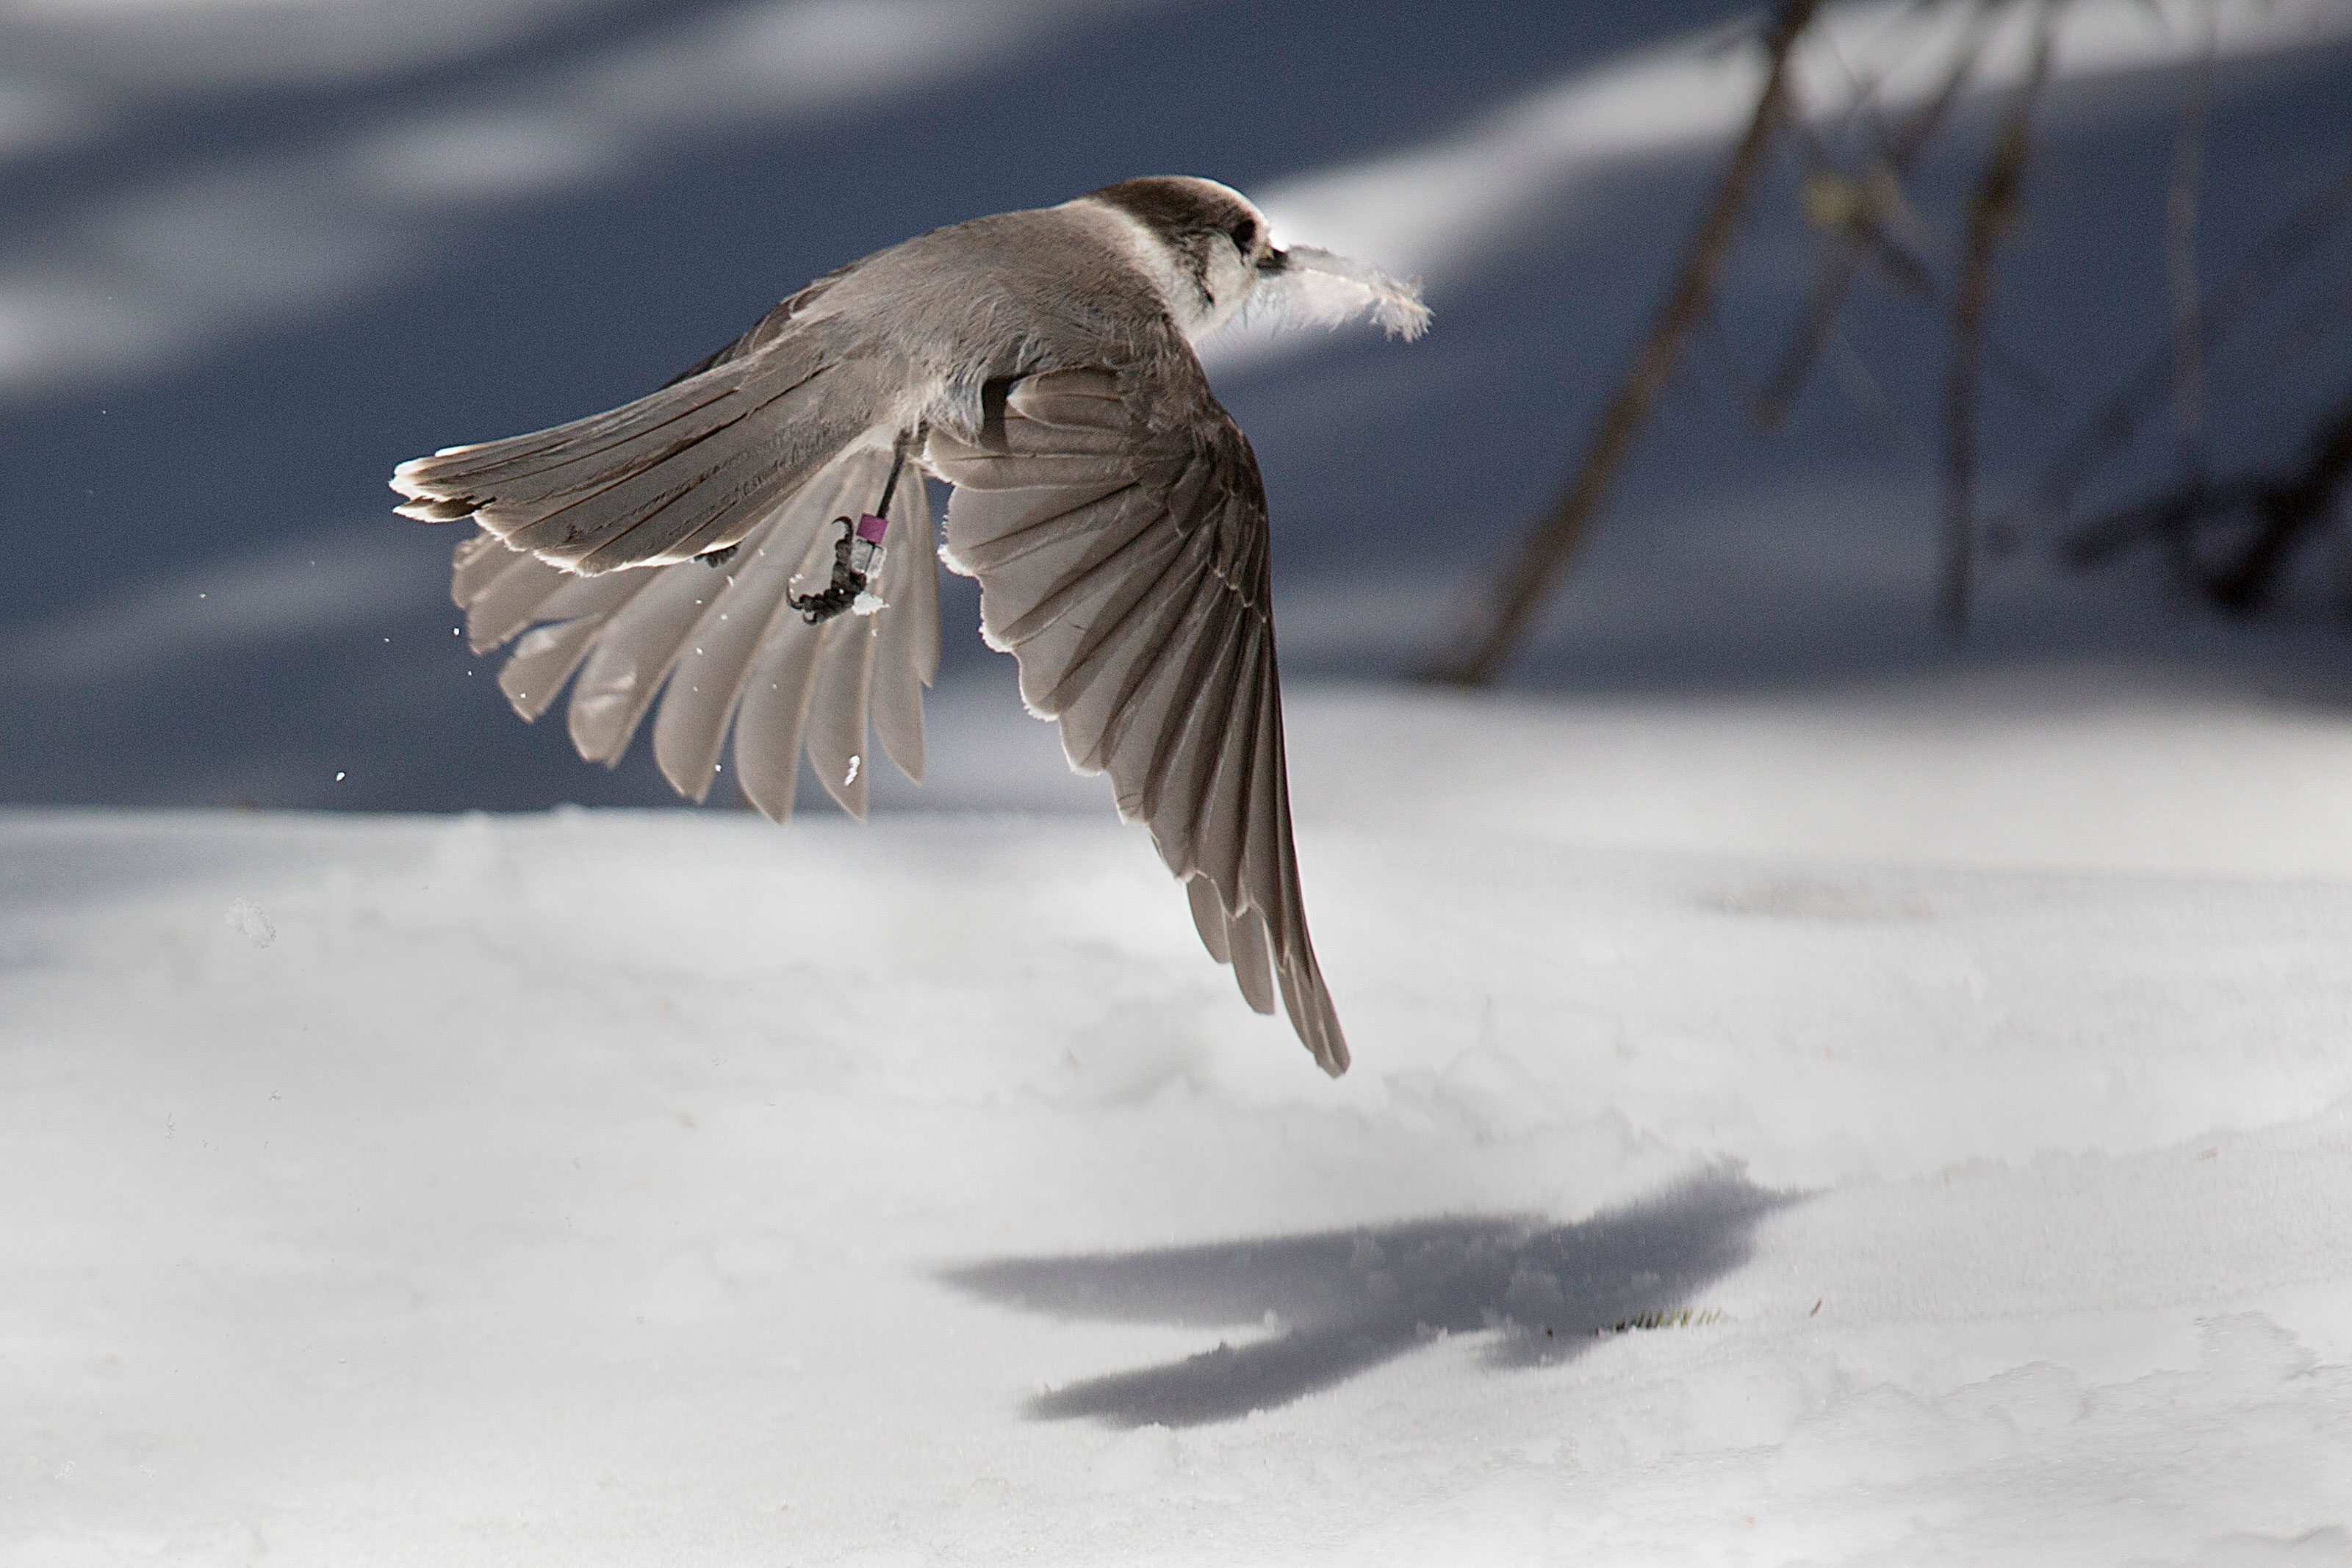 Researchers offer cotton and feathers that the jays collect for their nests. Photo by Chris Foito.